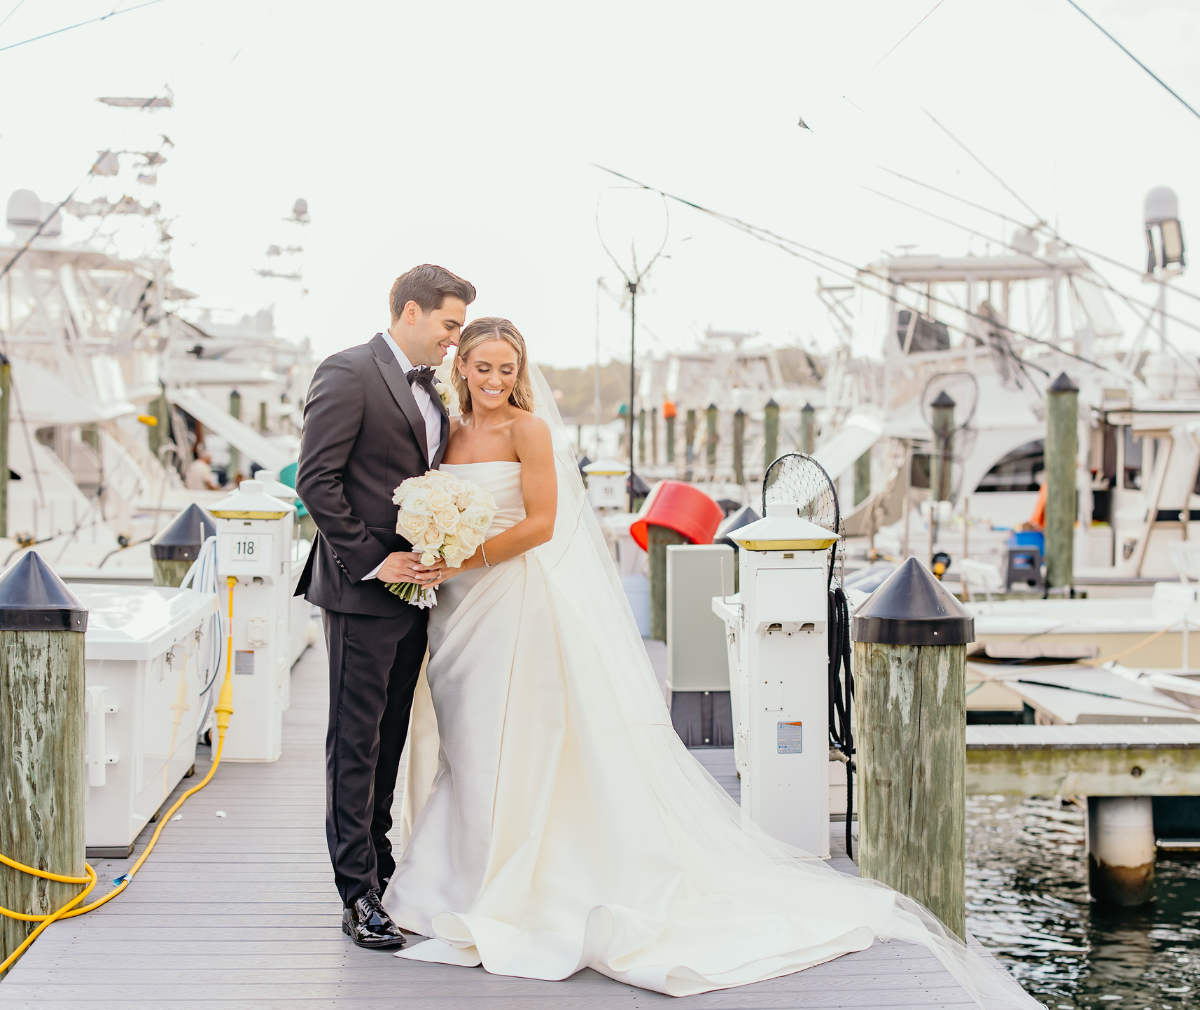 Clarks Landing wedding venue showing married couple and sunset